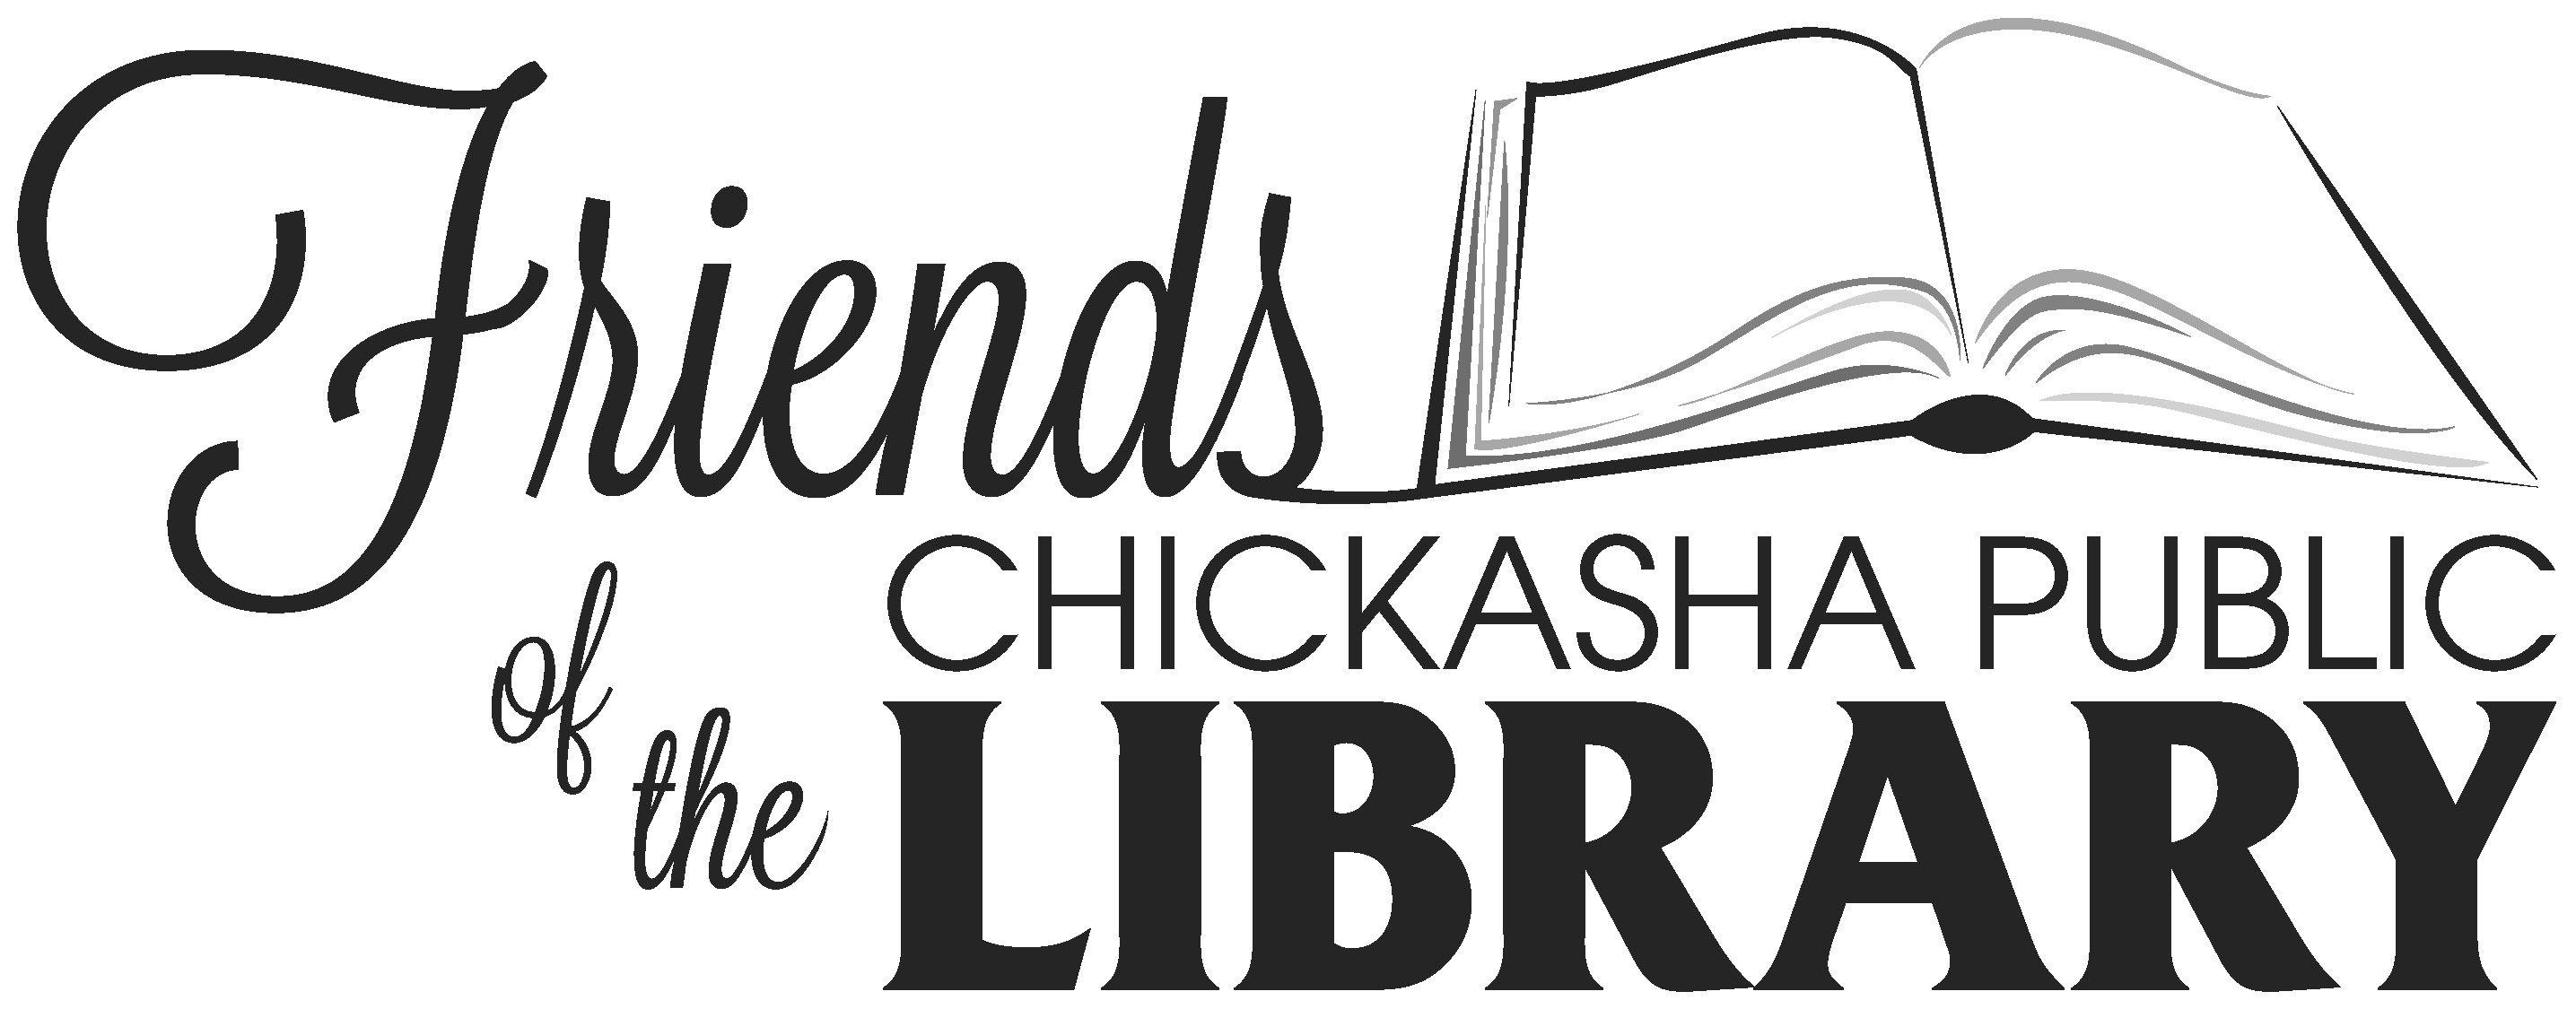 Chickasha Logo - Friends of the Library